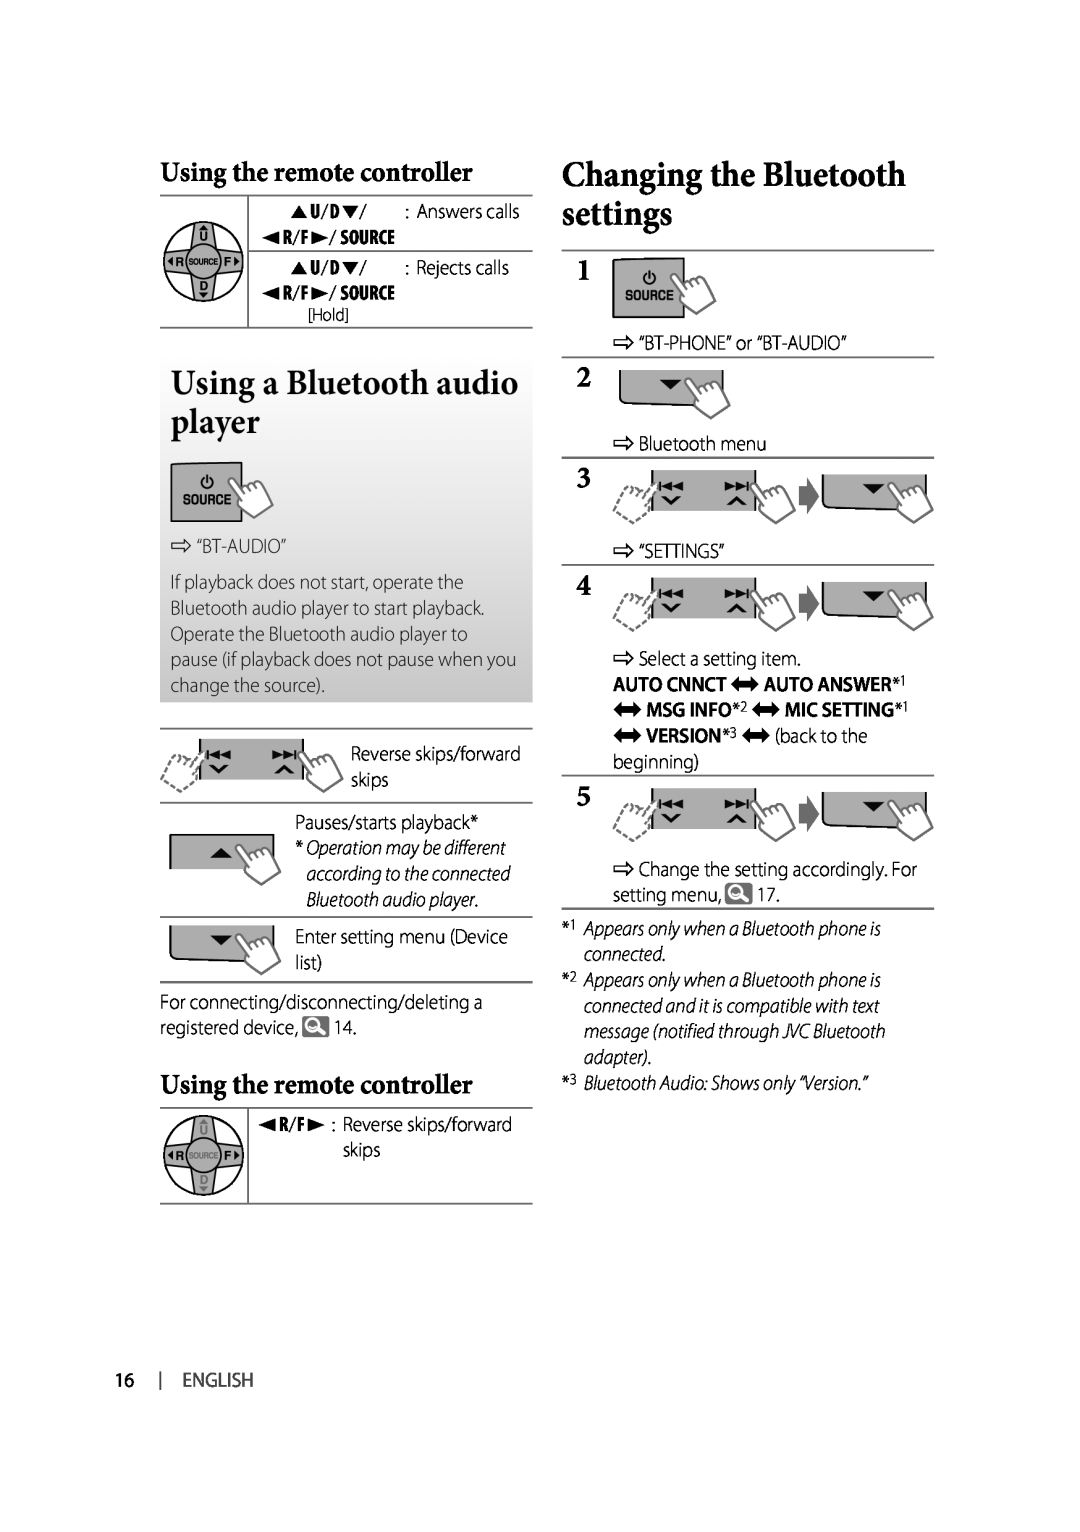 JVC KW-XR616 manual Using a Bluetooth audio player, Changing the Bluetooth settings, Bluetooth Audio Shows only “Version.” 